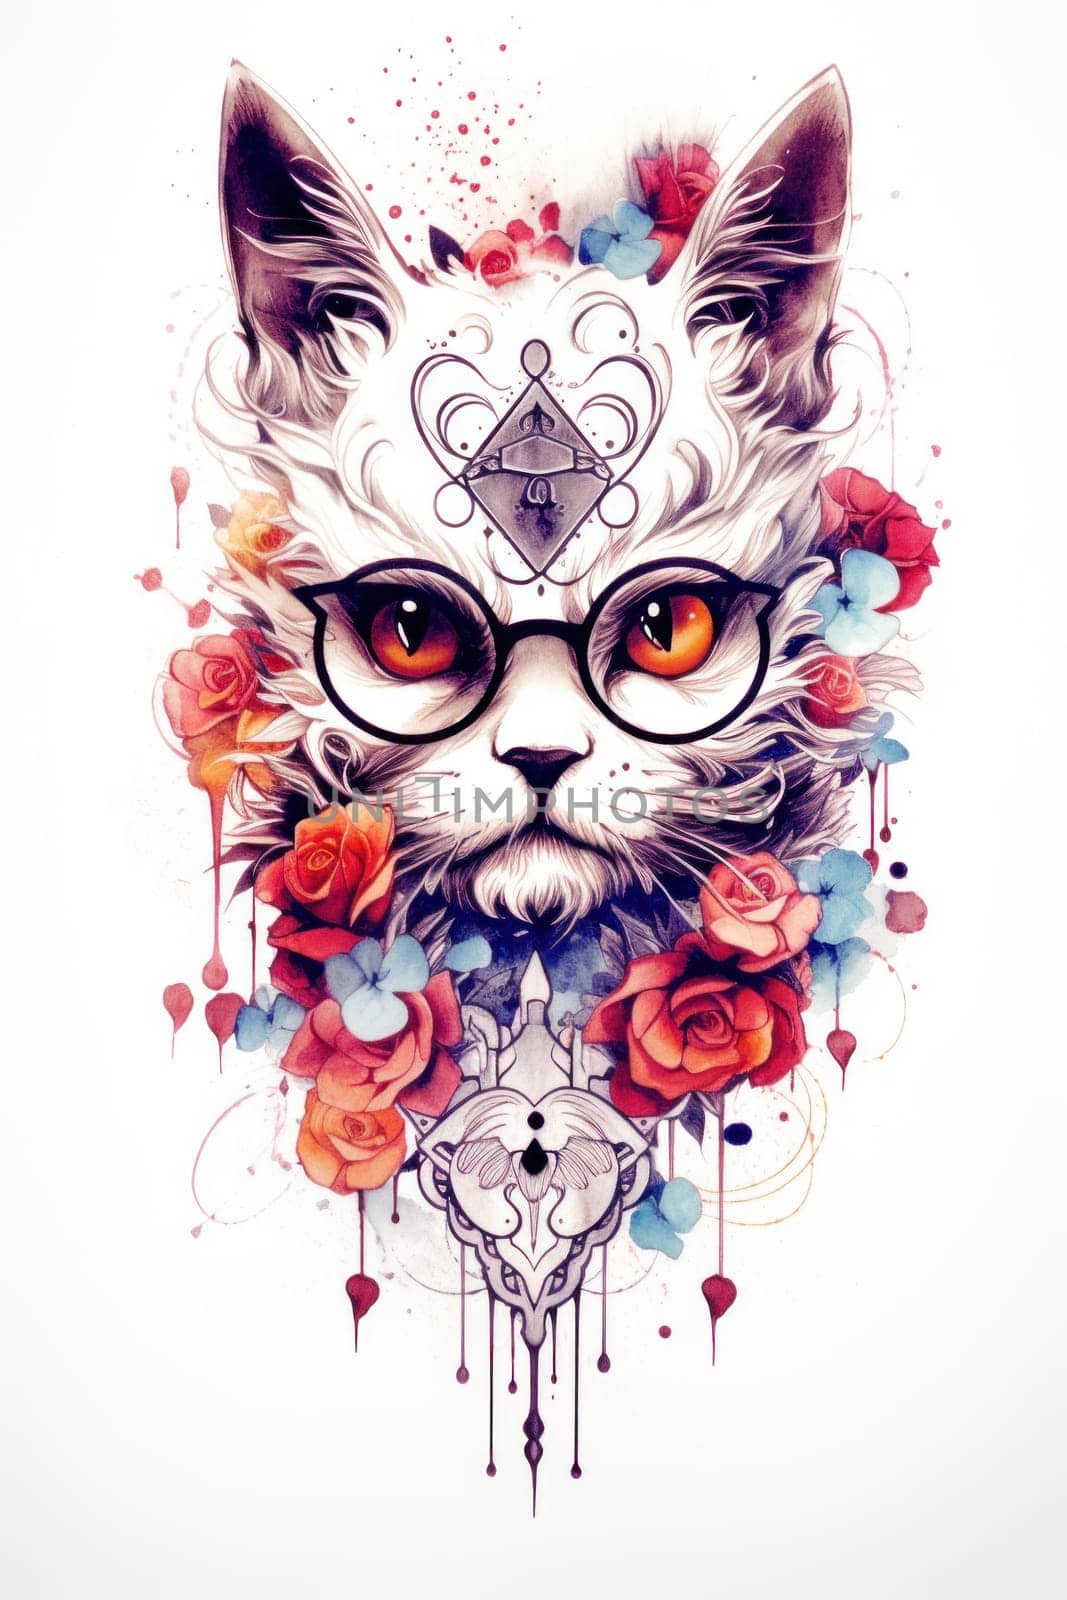 A drawing of a cat with glasses and flowers, AI by starush